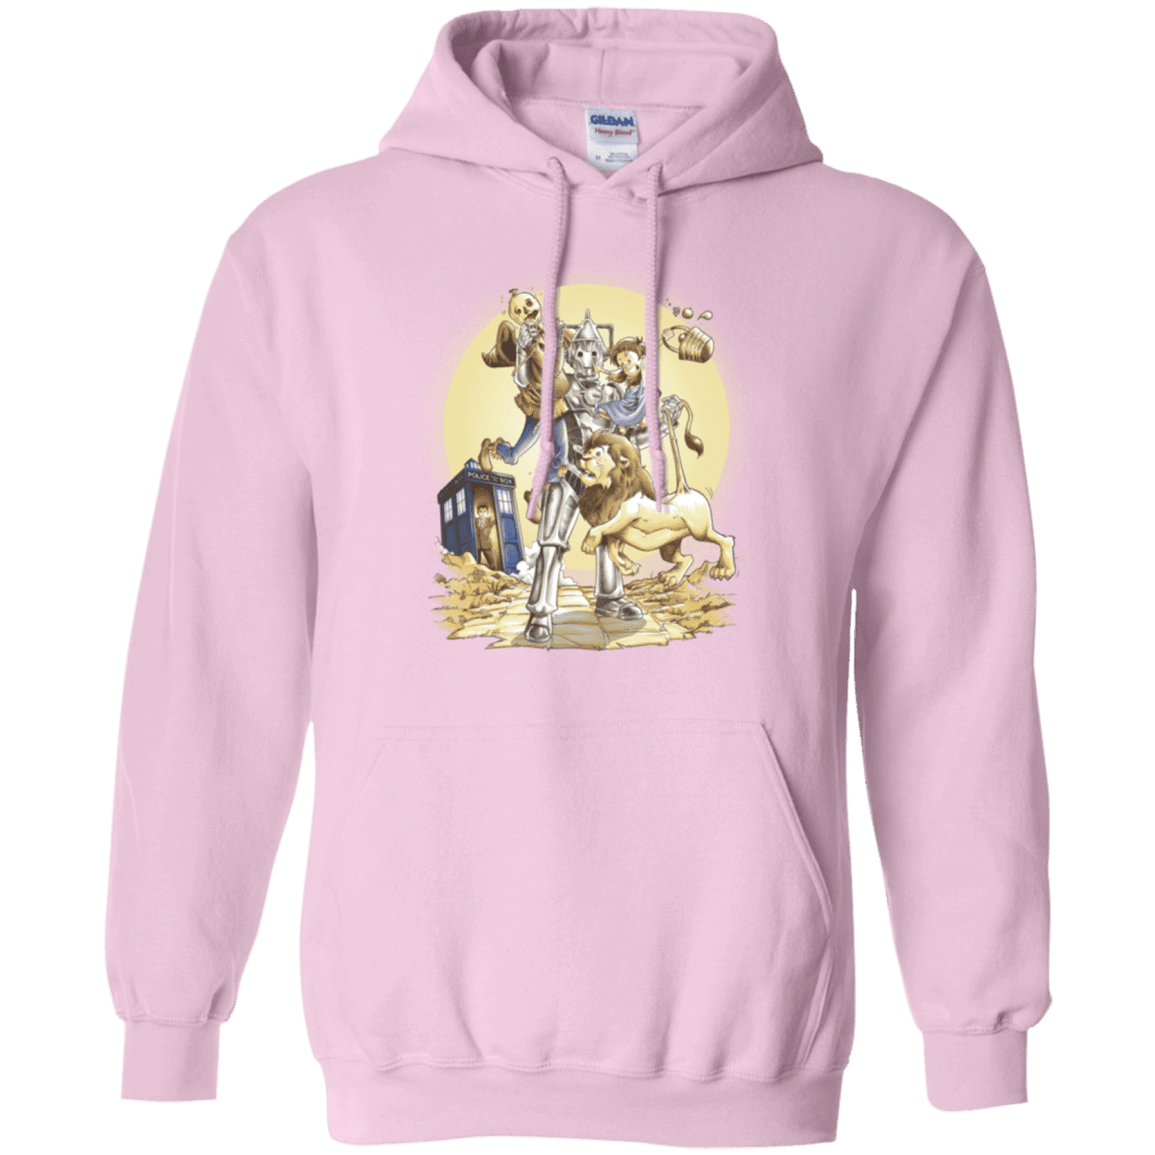 Sweatshirts Light Pink / Small Doctor Oz Pullover Hoodie